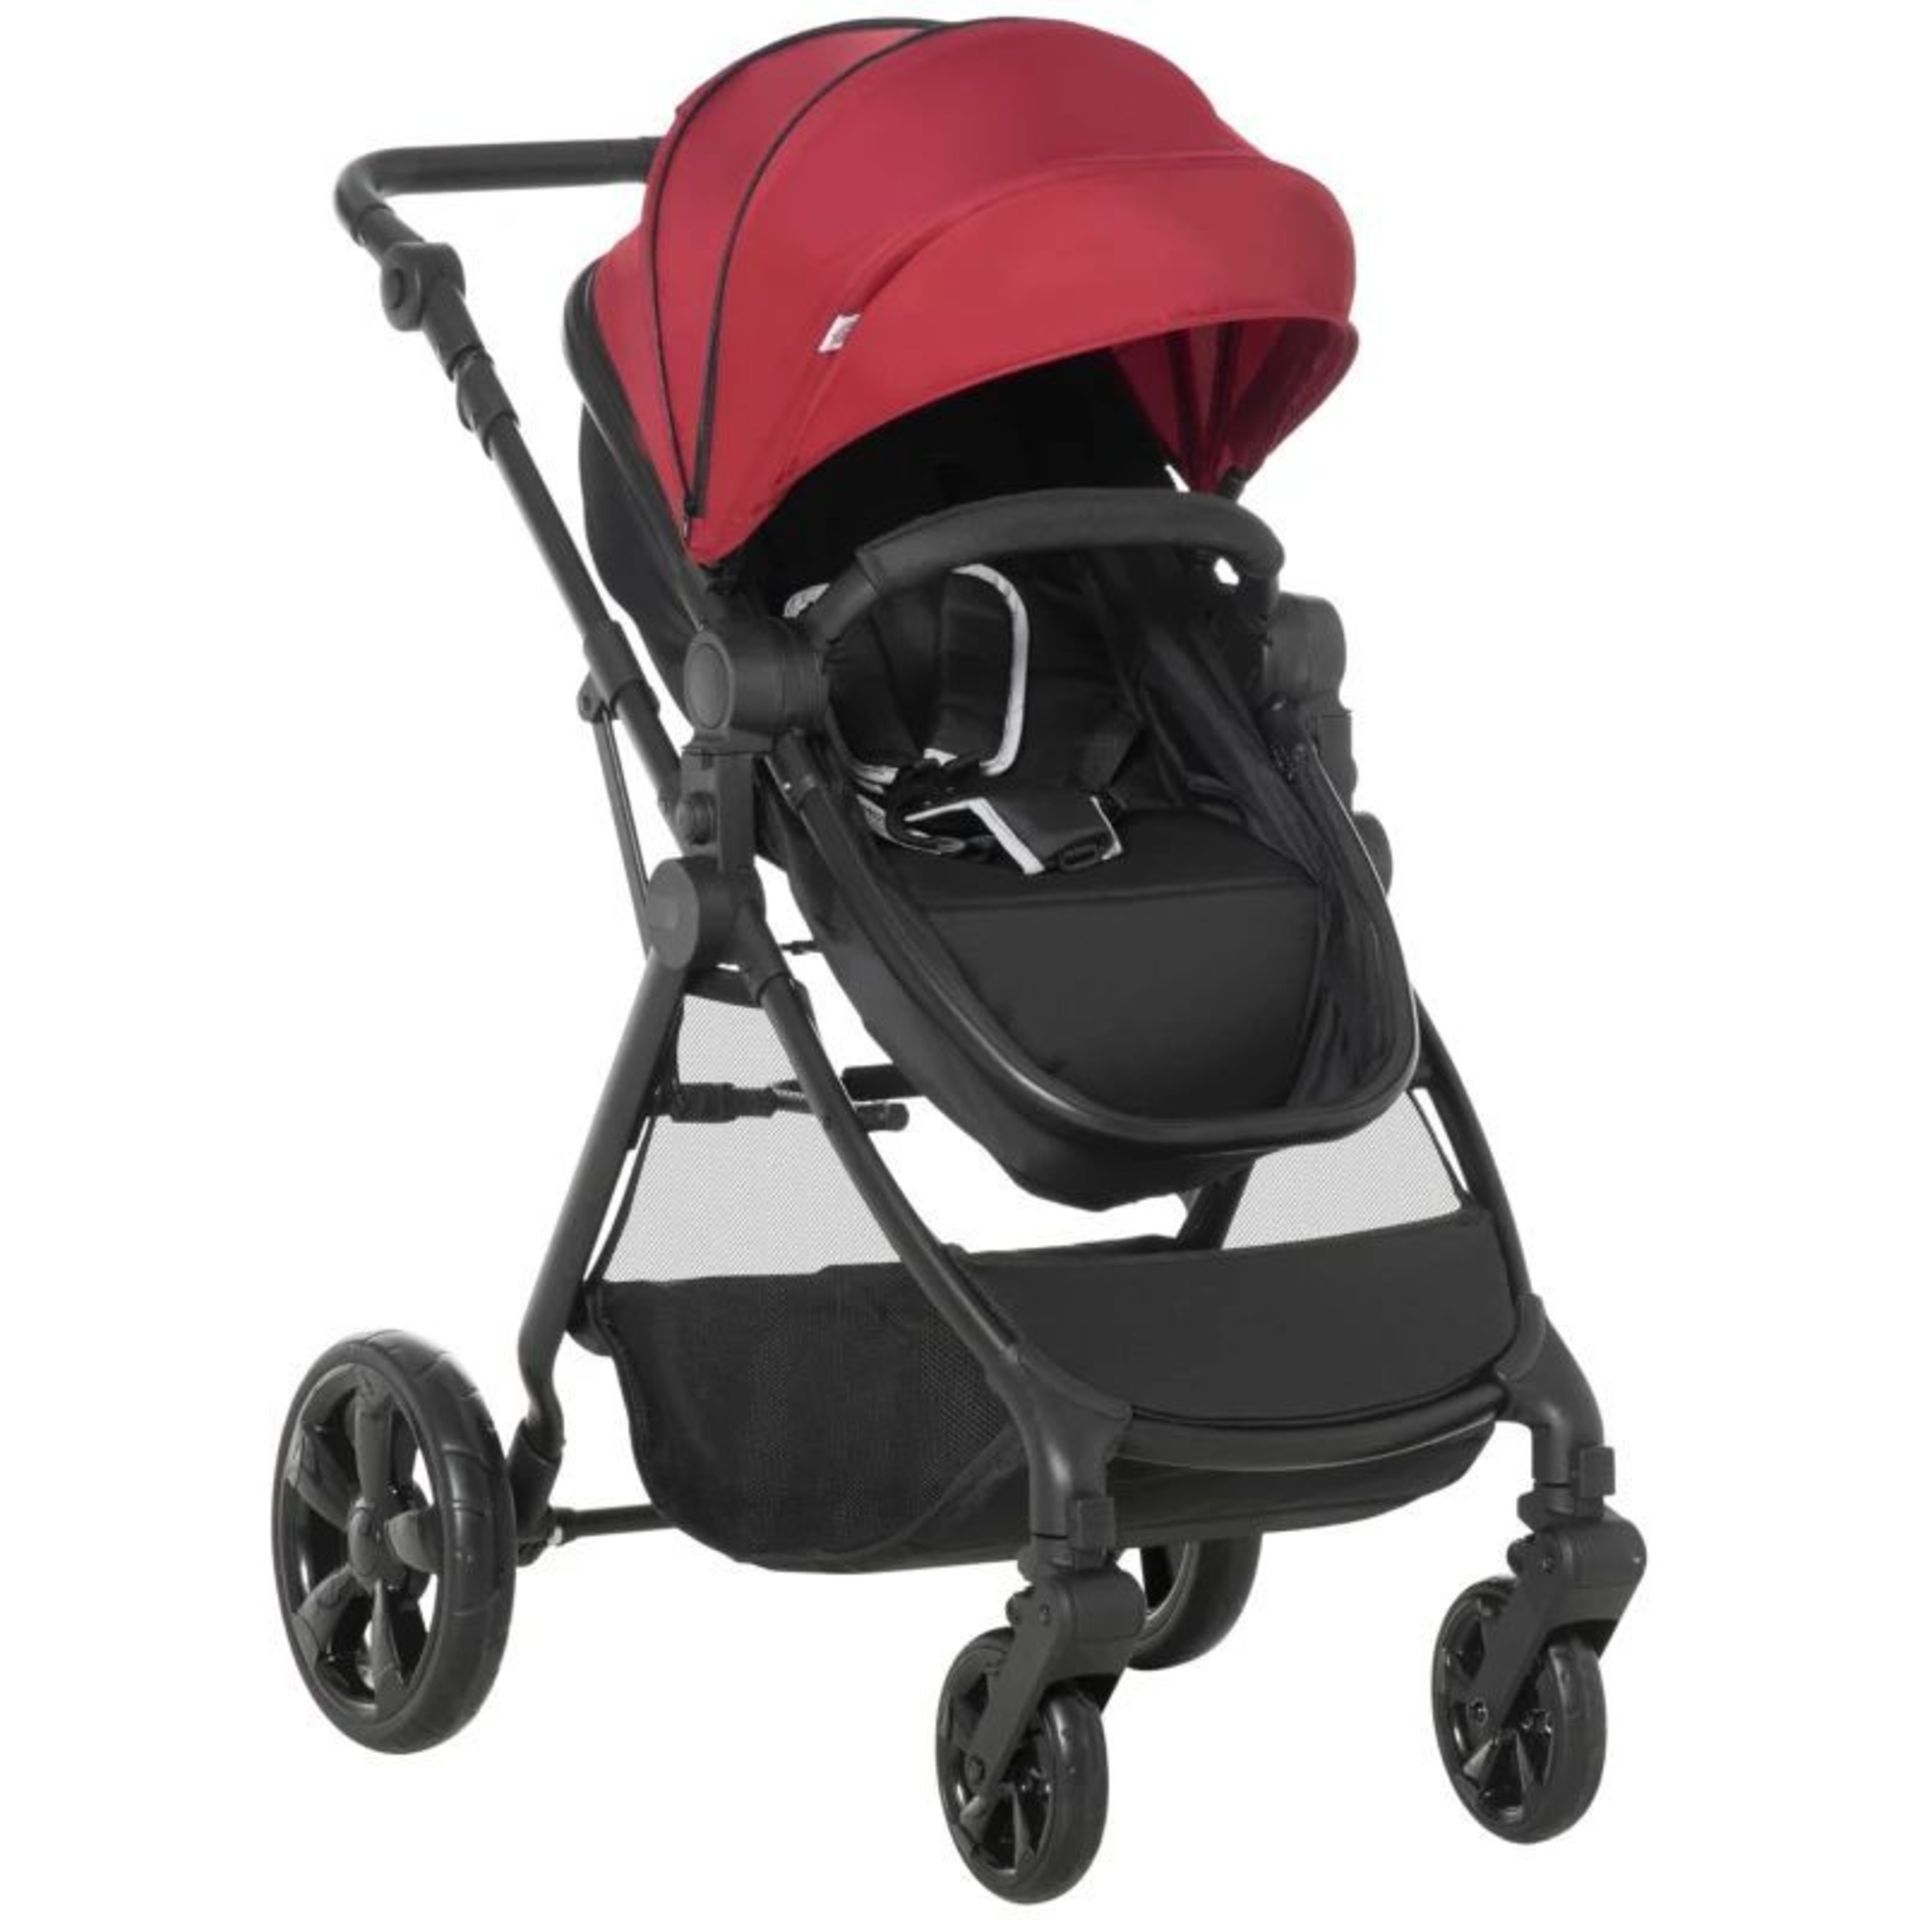 HOMCOM Foldable Baby Stoller, with Reclining Backrest, Adjustable Canopy, for Ages 0-36 Months - - Image 2 of 2